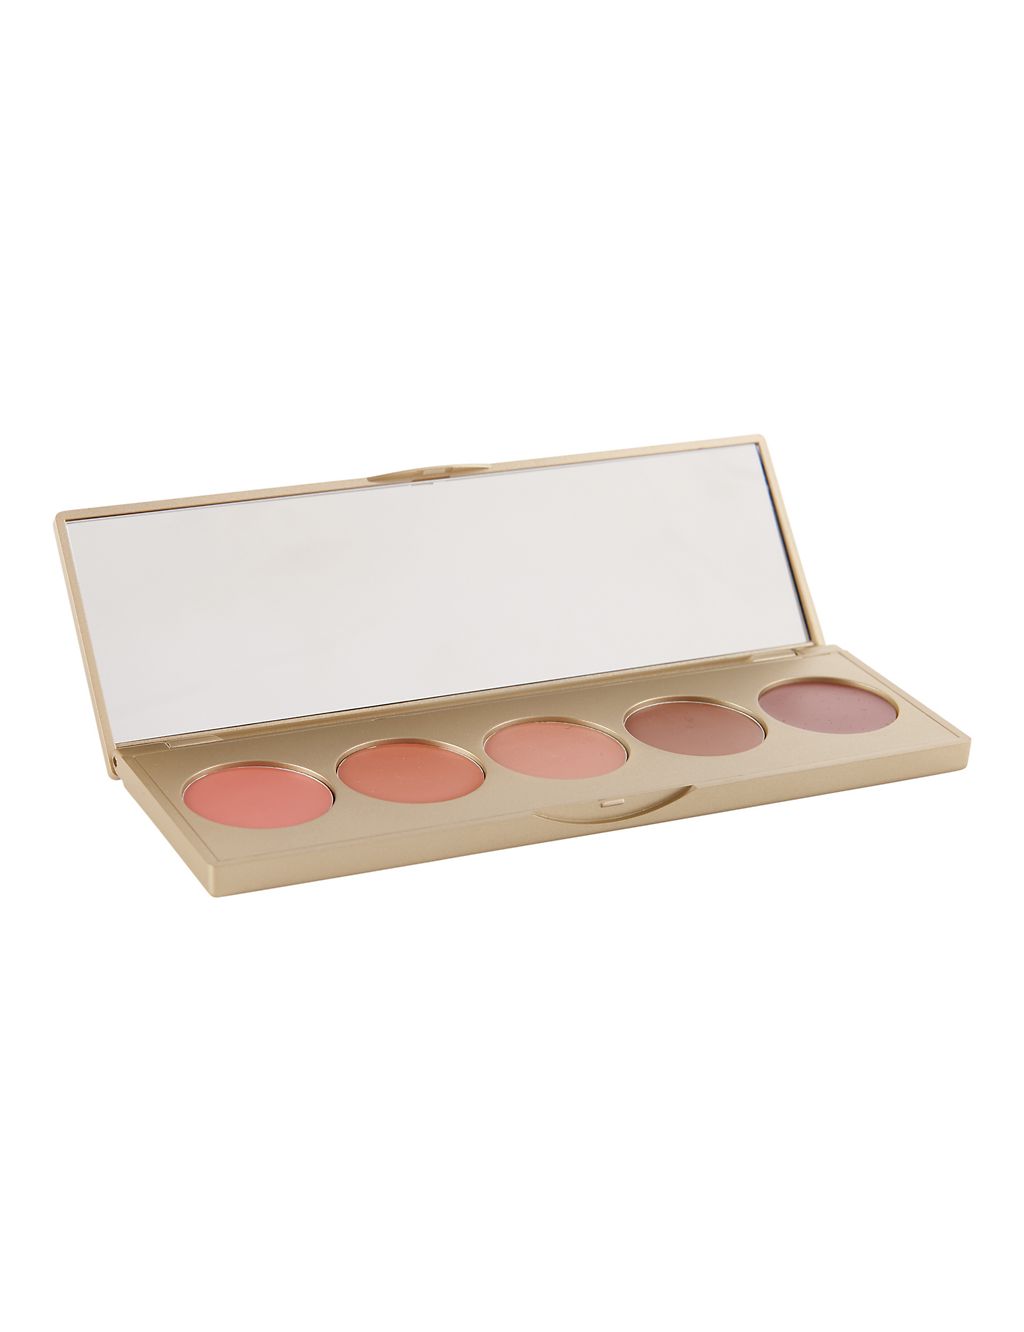 Sunset Serenade Convertible Color Palette 7.5g 3 of 3